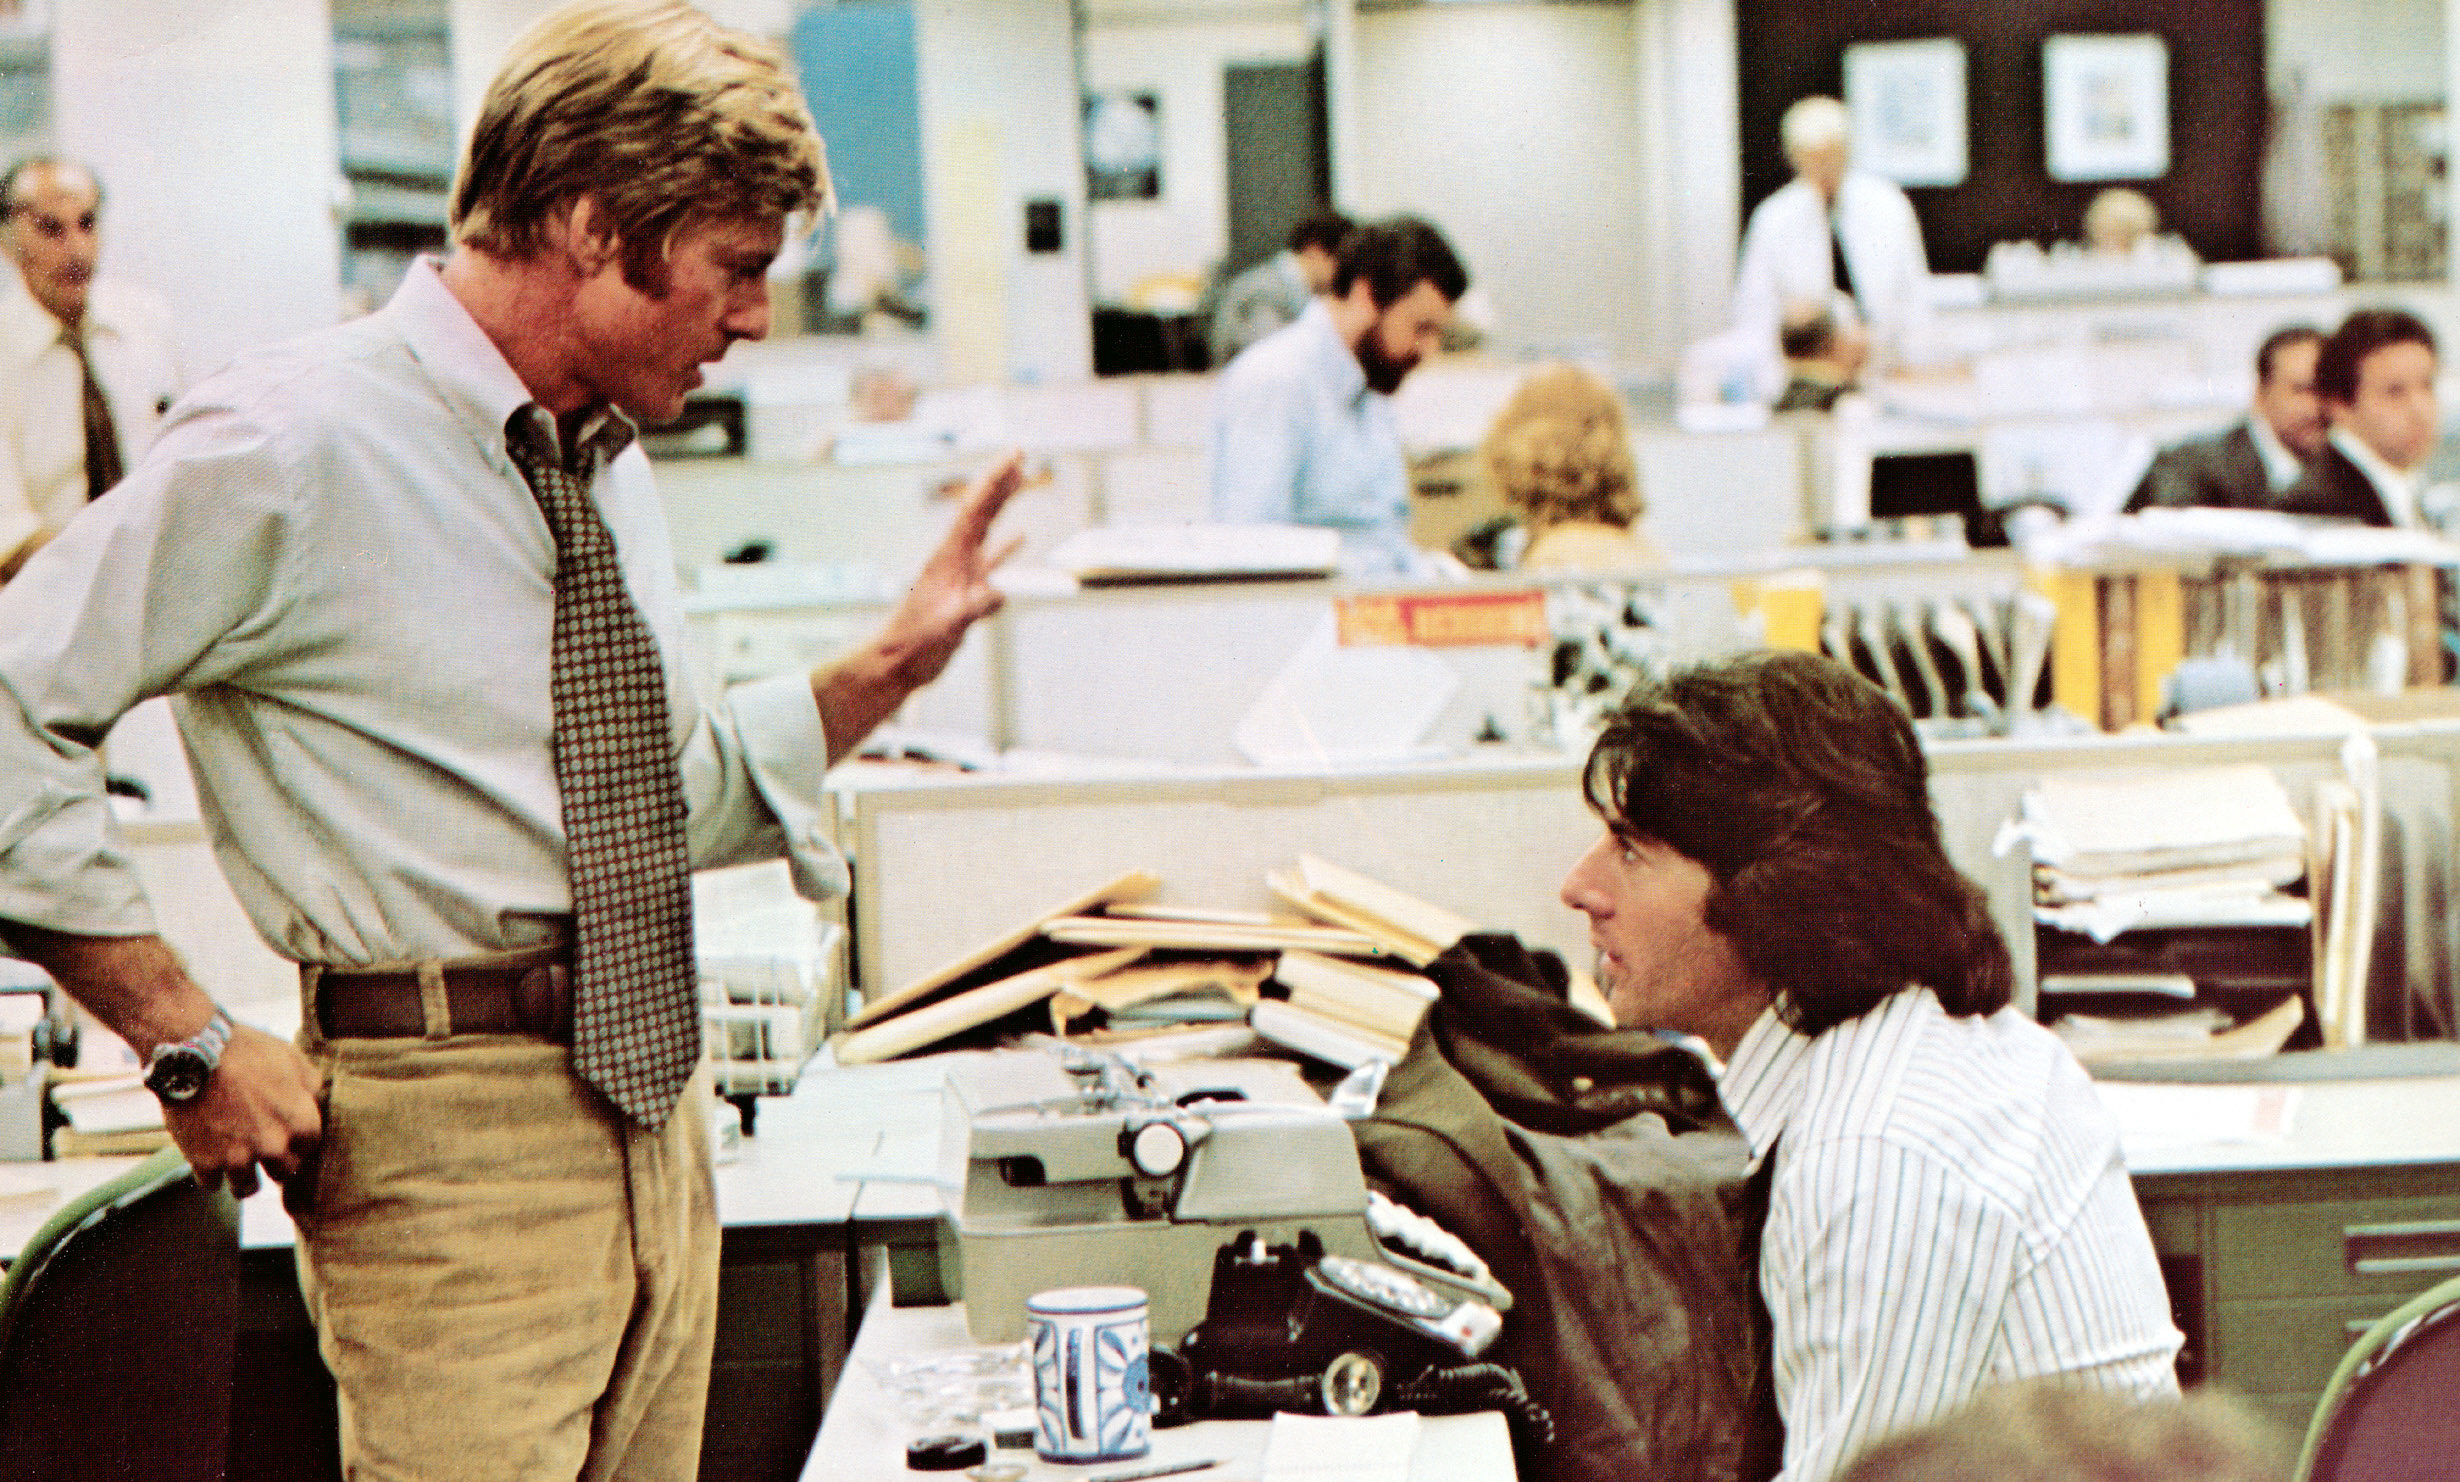 Robert Redford and Dustin Hoffman talking at a desk.